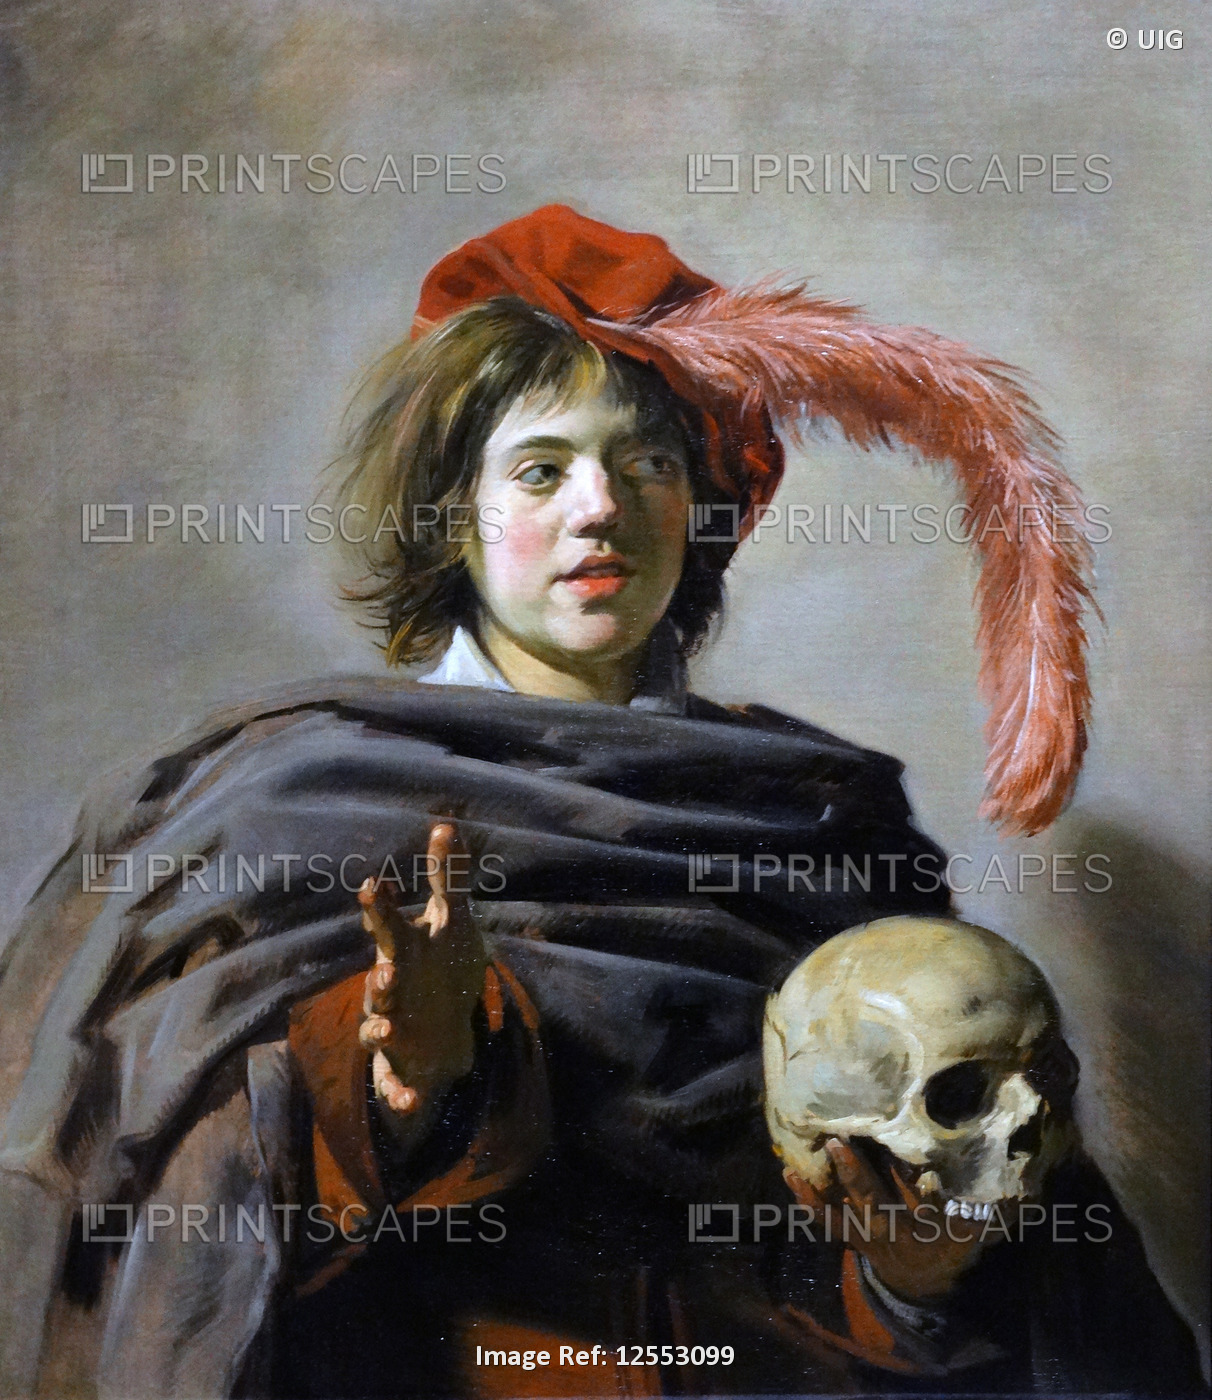 Painting titled 'Young Man holding a Skull (Vanitas)' by Frans Hals the Elder, 17th century